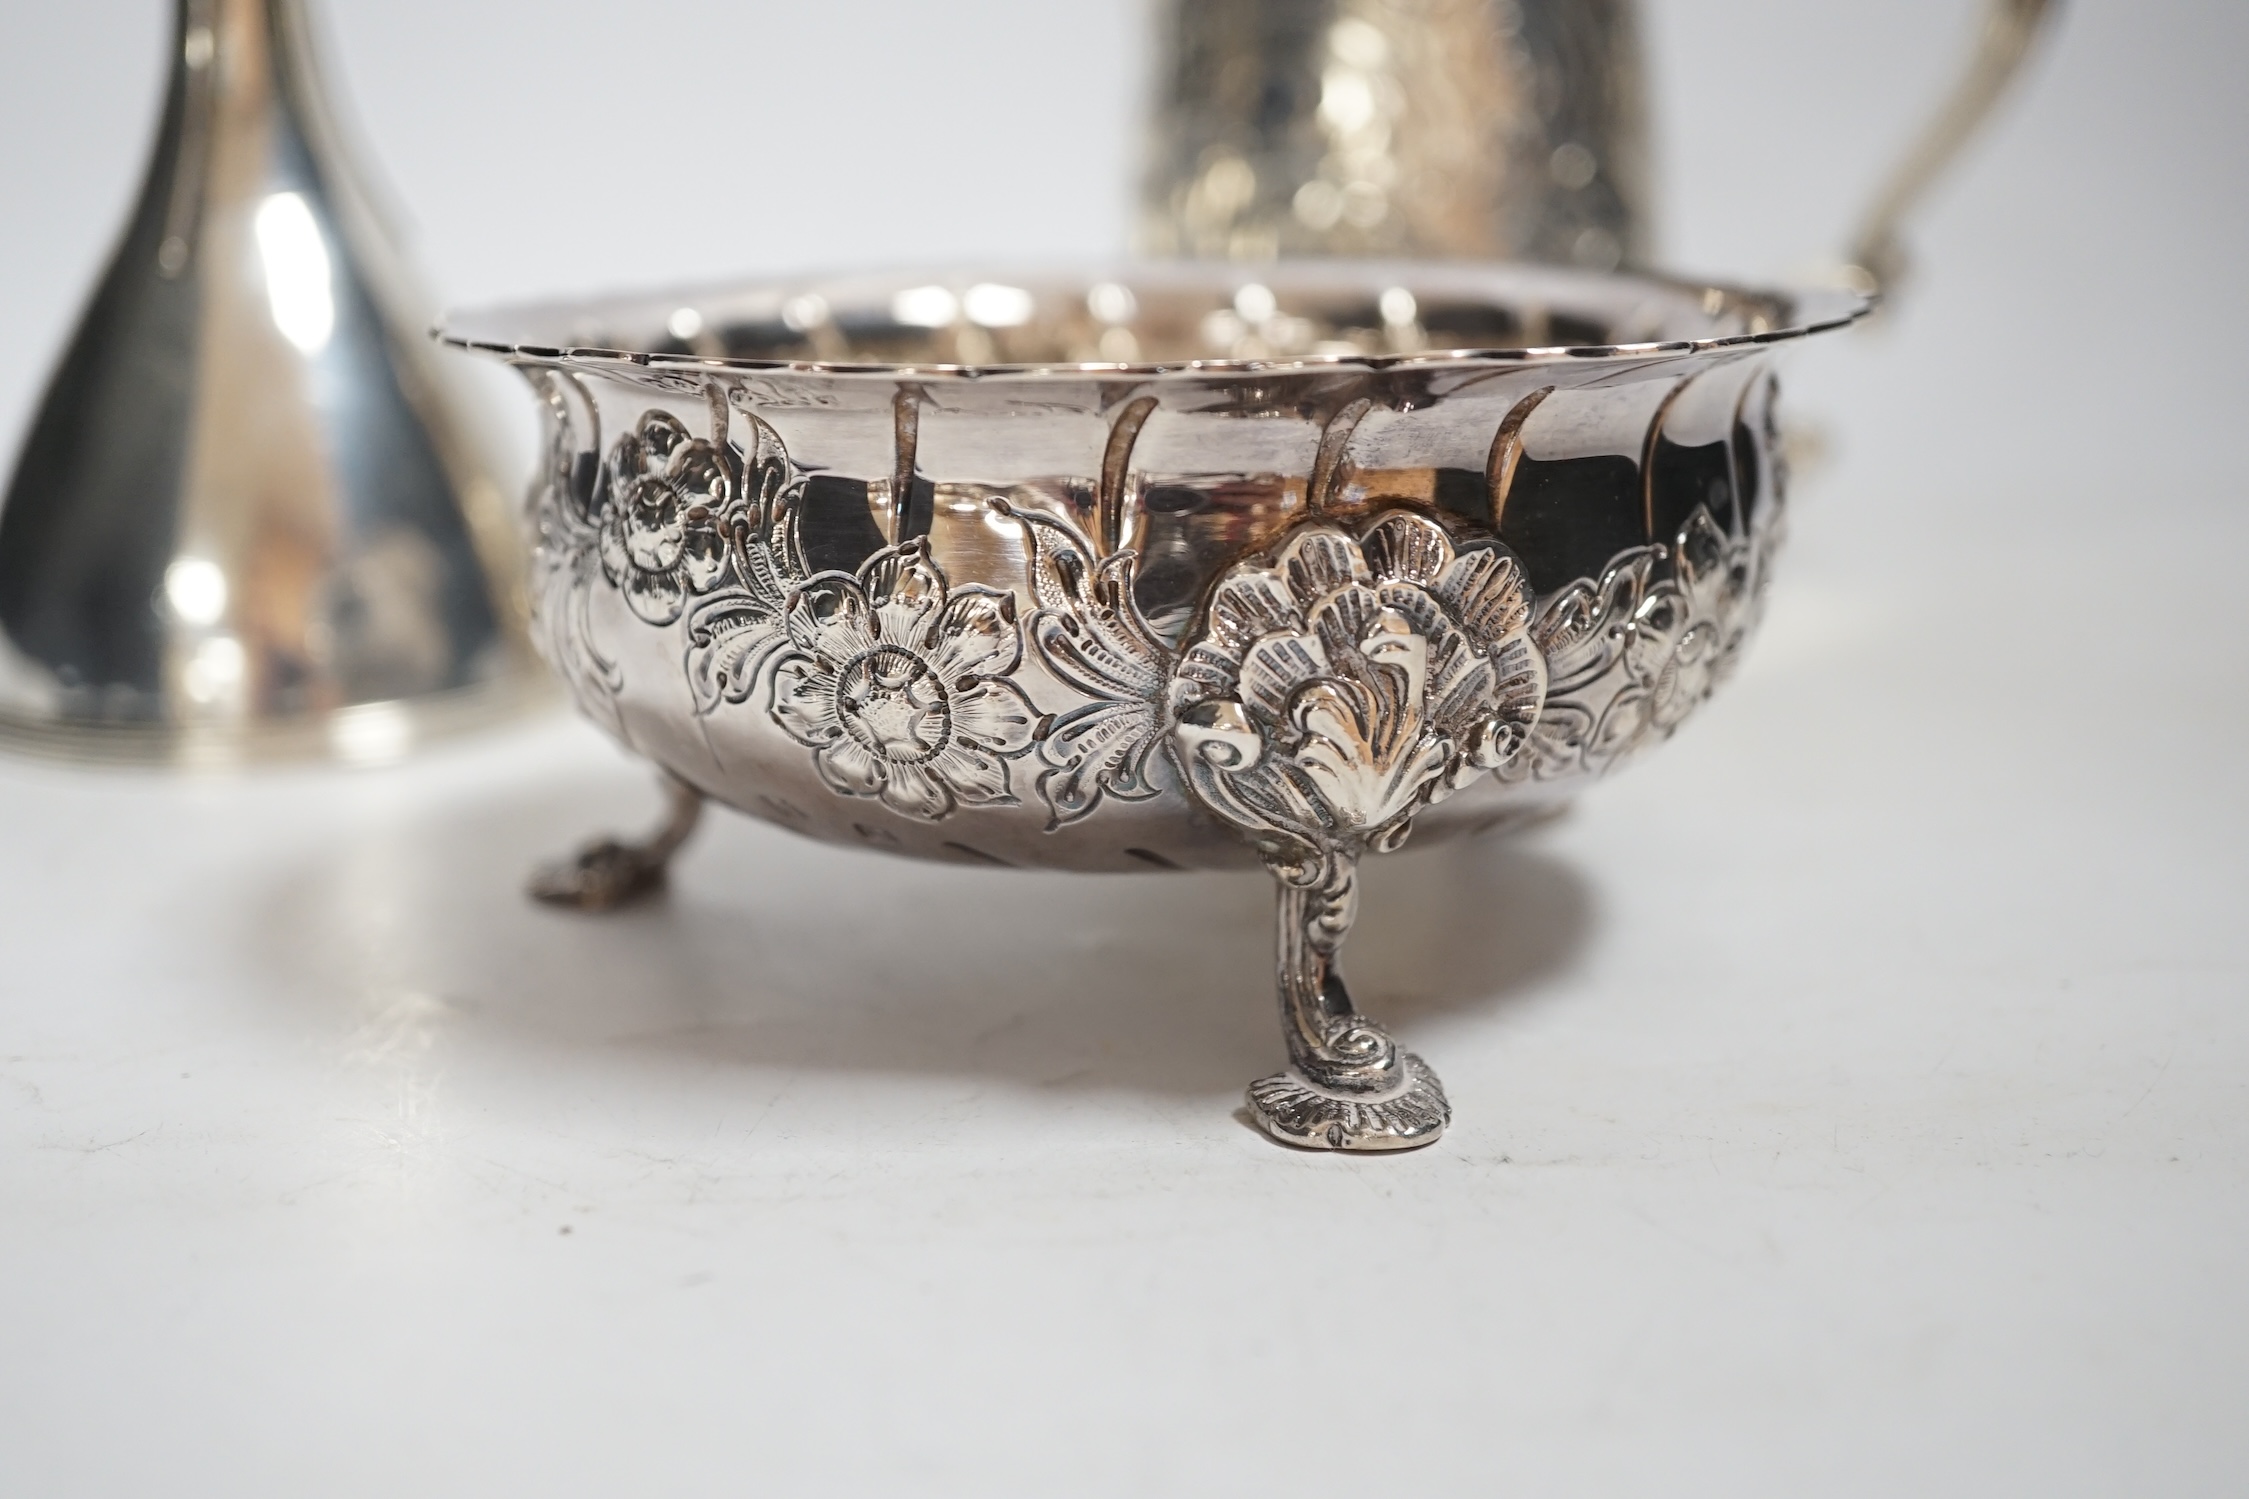 A George III silver mug, with later embossed decoration, London, 1783,11.6cm, together with a George III silver wine funnel and a modern Irish silver sugar bowl, 21.5oz.